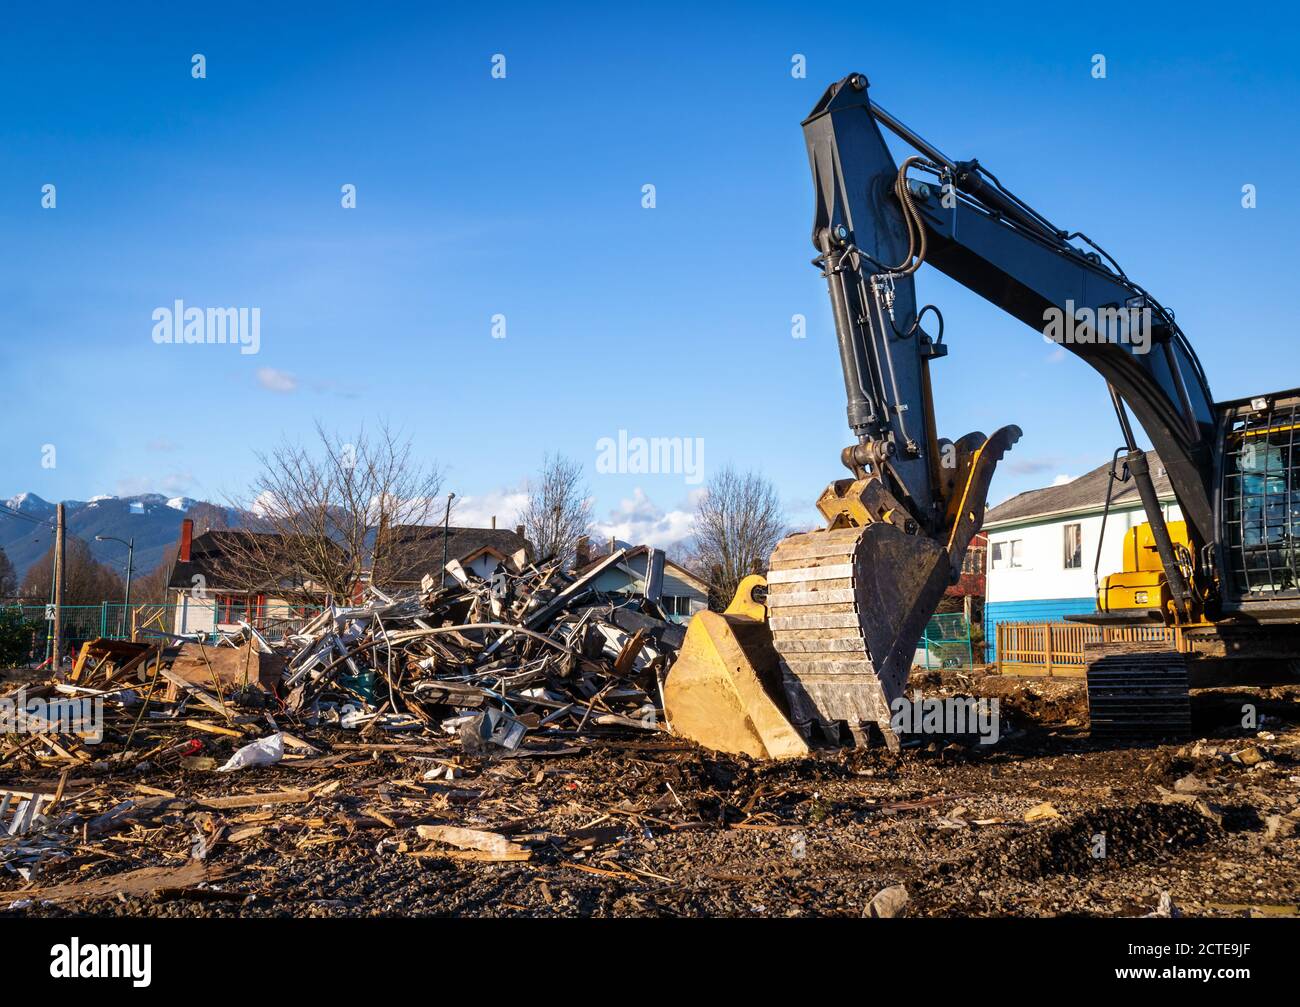 Demolition bulldozer in front of building rubble. Bucket is down, side view. Yellow construction machine with residential buildings and mountains. Stock Photo